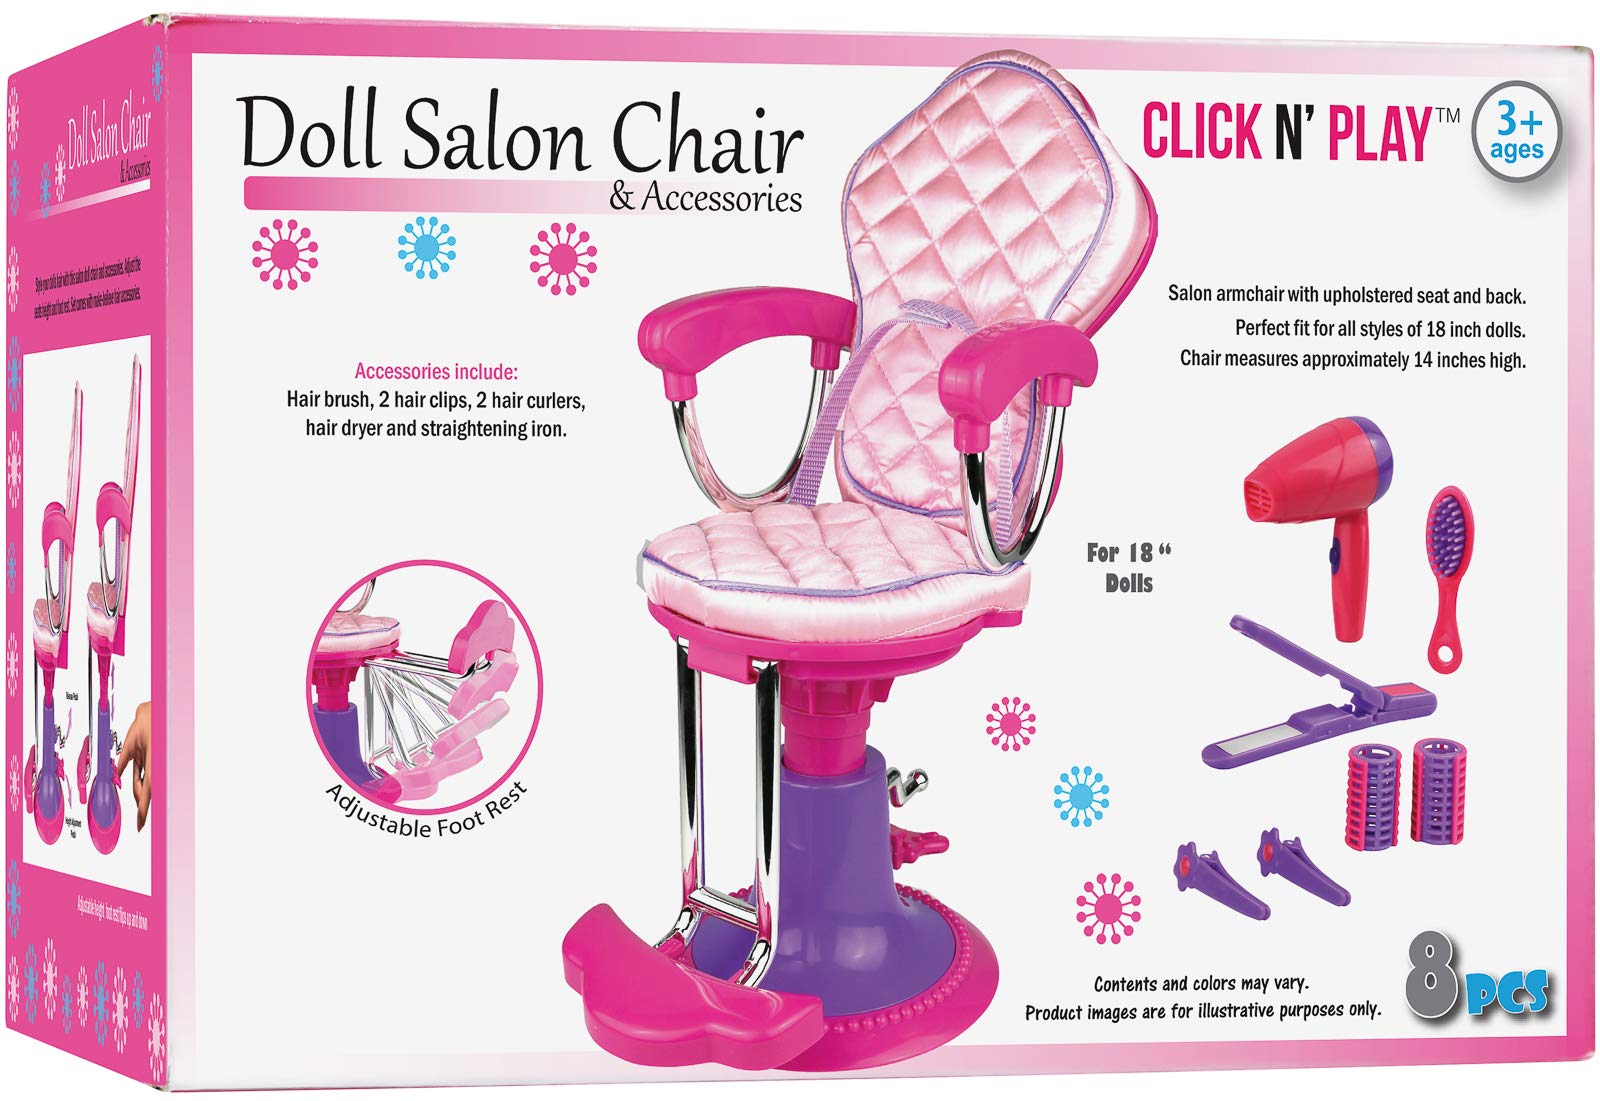 Pretend Play Hair Salon Toy for Girls, Click N' Play Doll Salon Chair with 8 Doll Hair Accessories: Chair, Hair Brush, 2 Hair Clips, 2 Curlers - Doll Accessories - Girl Gift Ages 3+, Pink & Purple